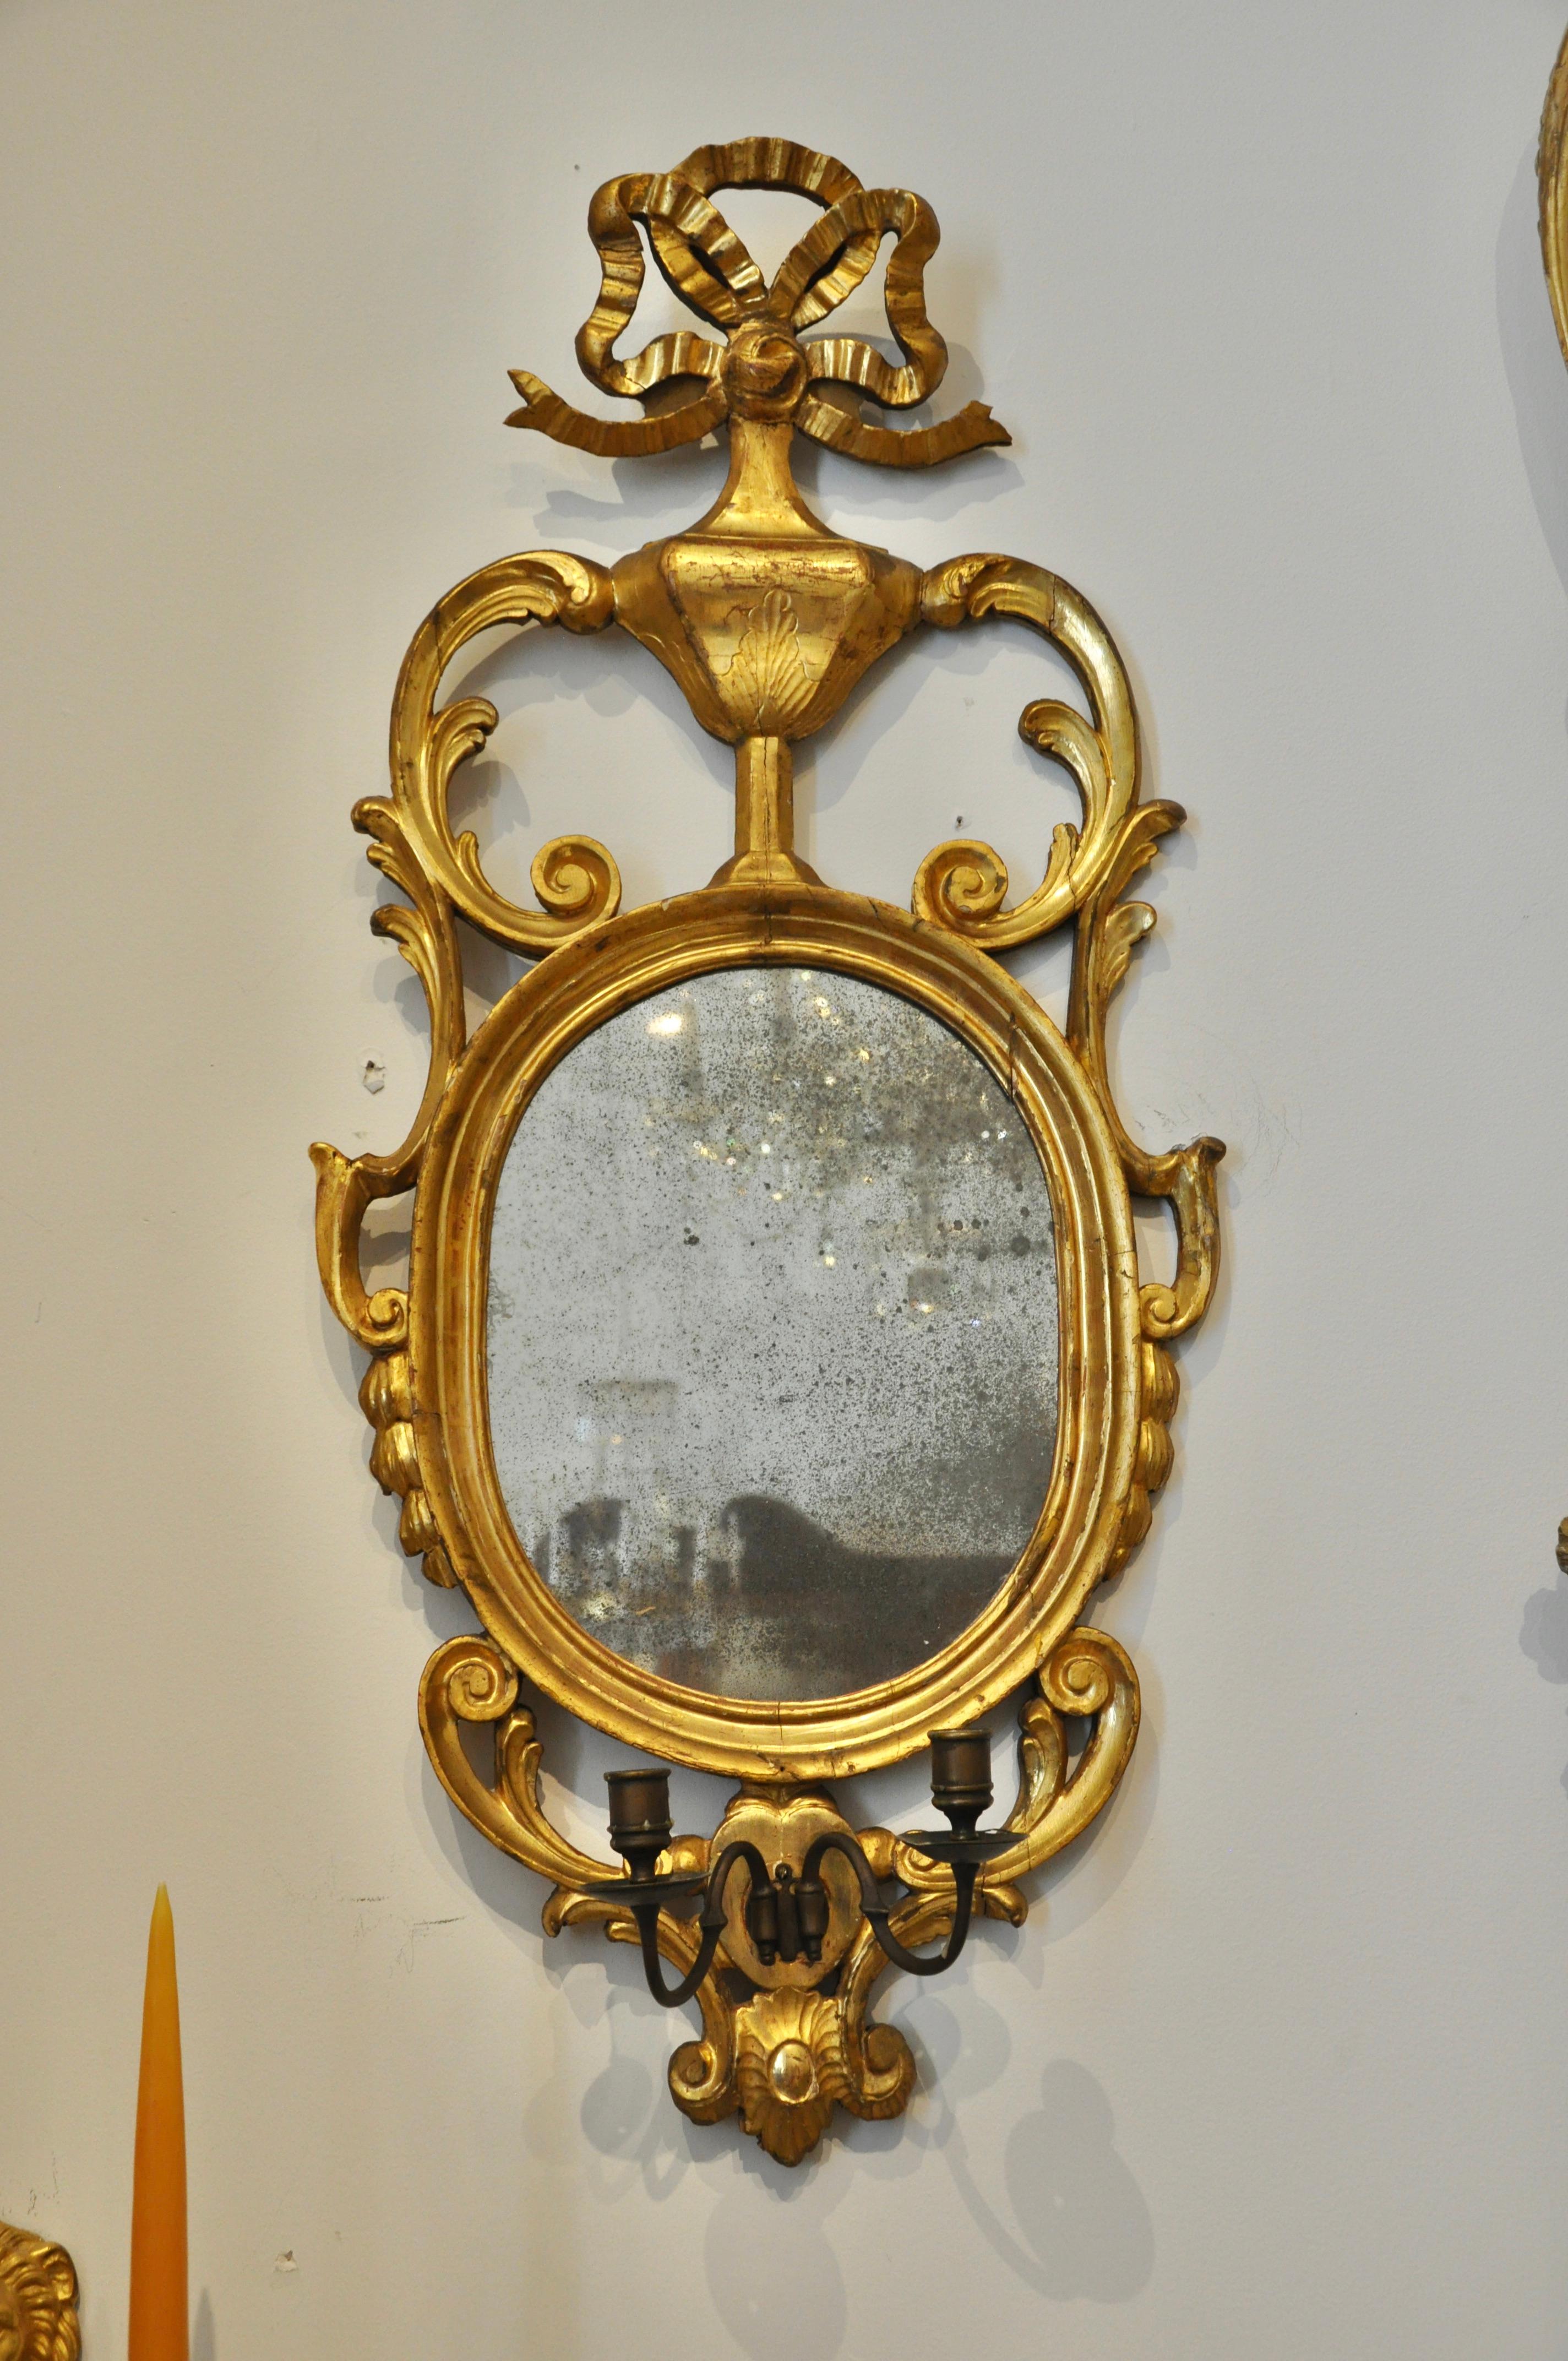 Pair of Early 19th Century Continental Neoclassical Giltwood Sconce Mirrors In Good Condition For Sale In Essex, MA